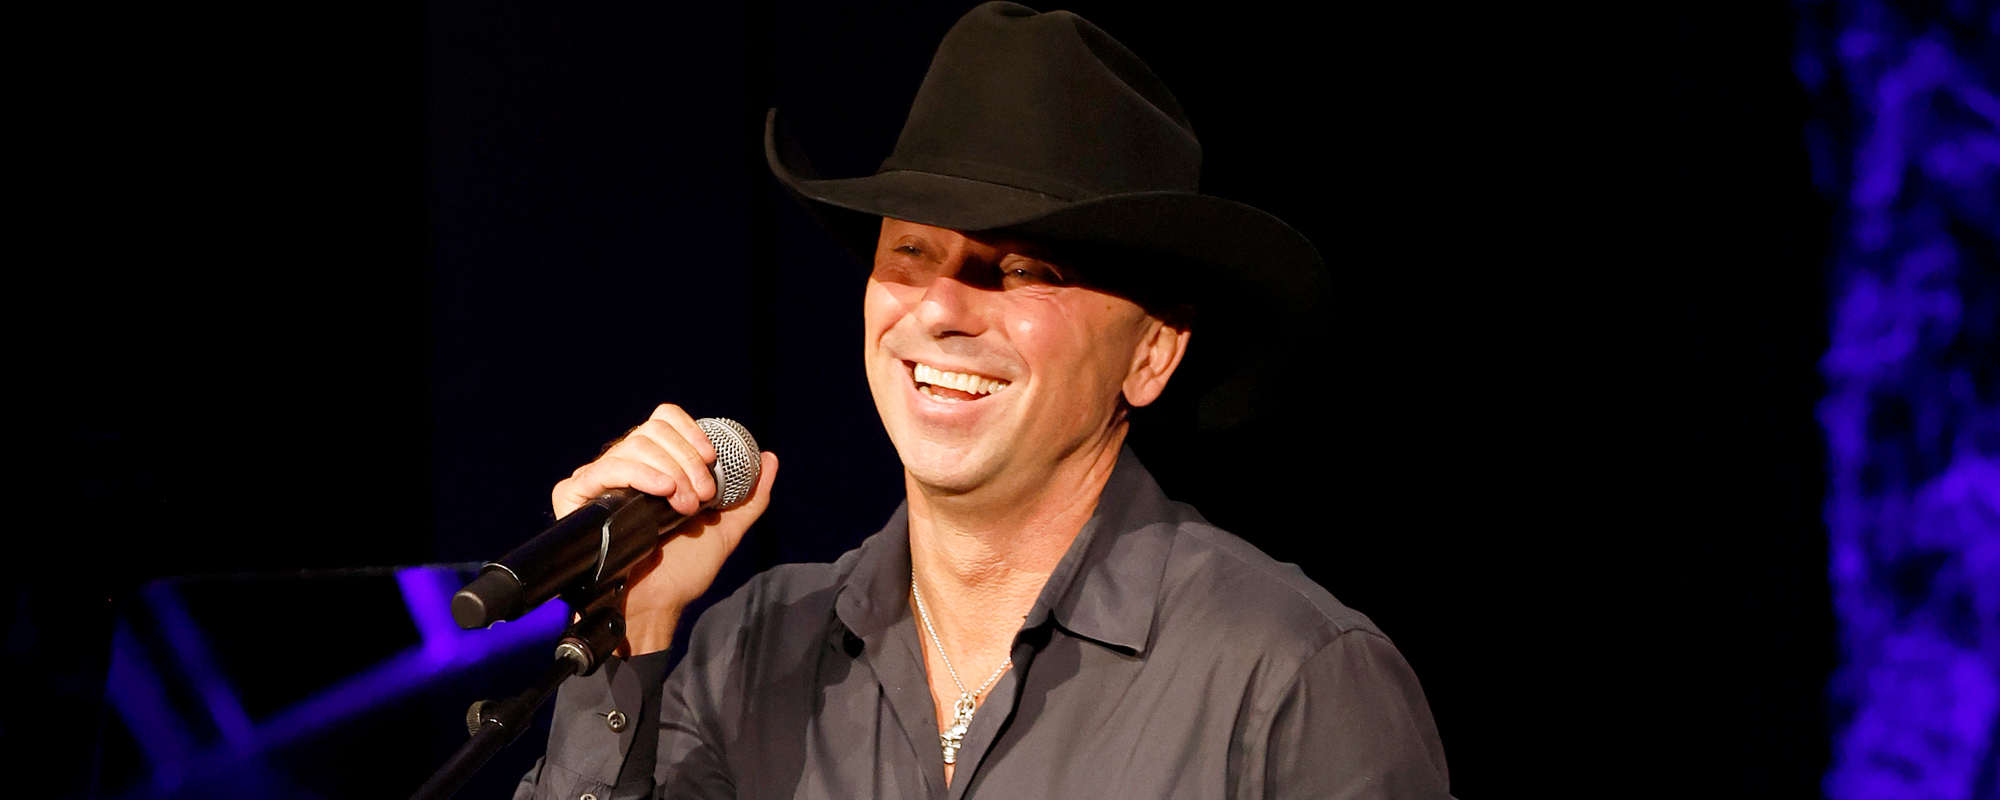 Watch Kenny Chesney Transcend Time With New Music Video for “Take Her Home”